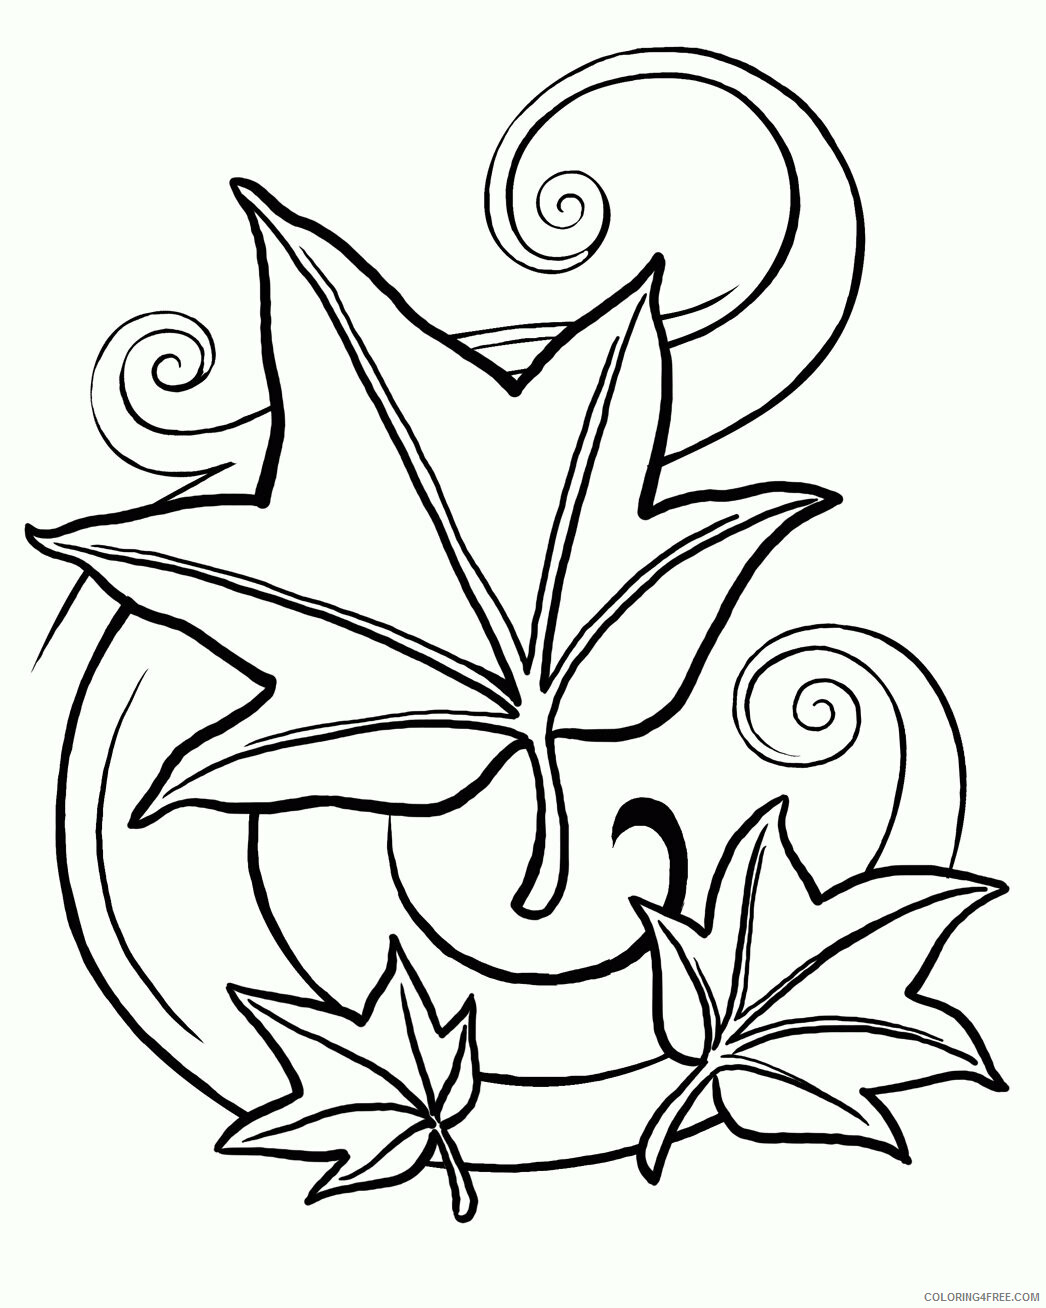 Autumn Leaf Coloring Page Printable Sheets Fall Leaves for 2021 a 3926 Coloring4free